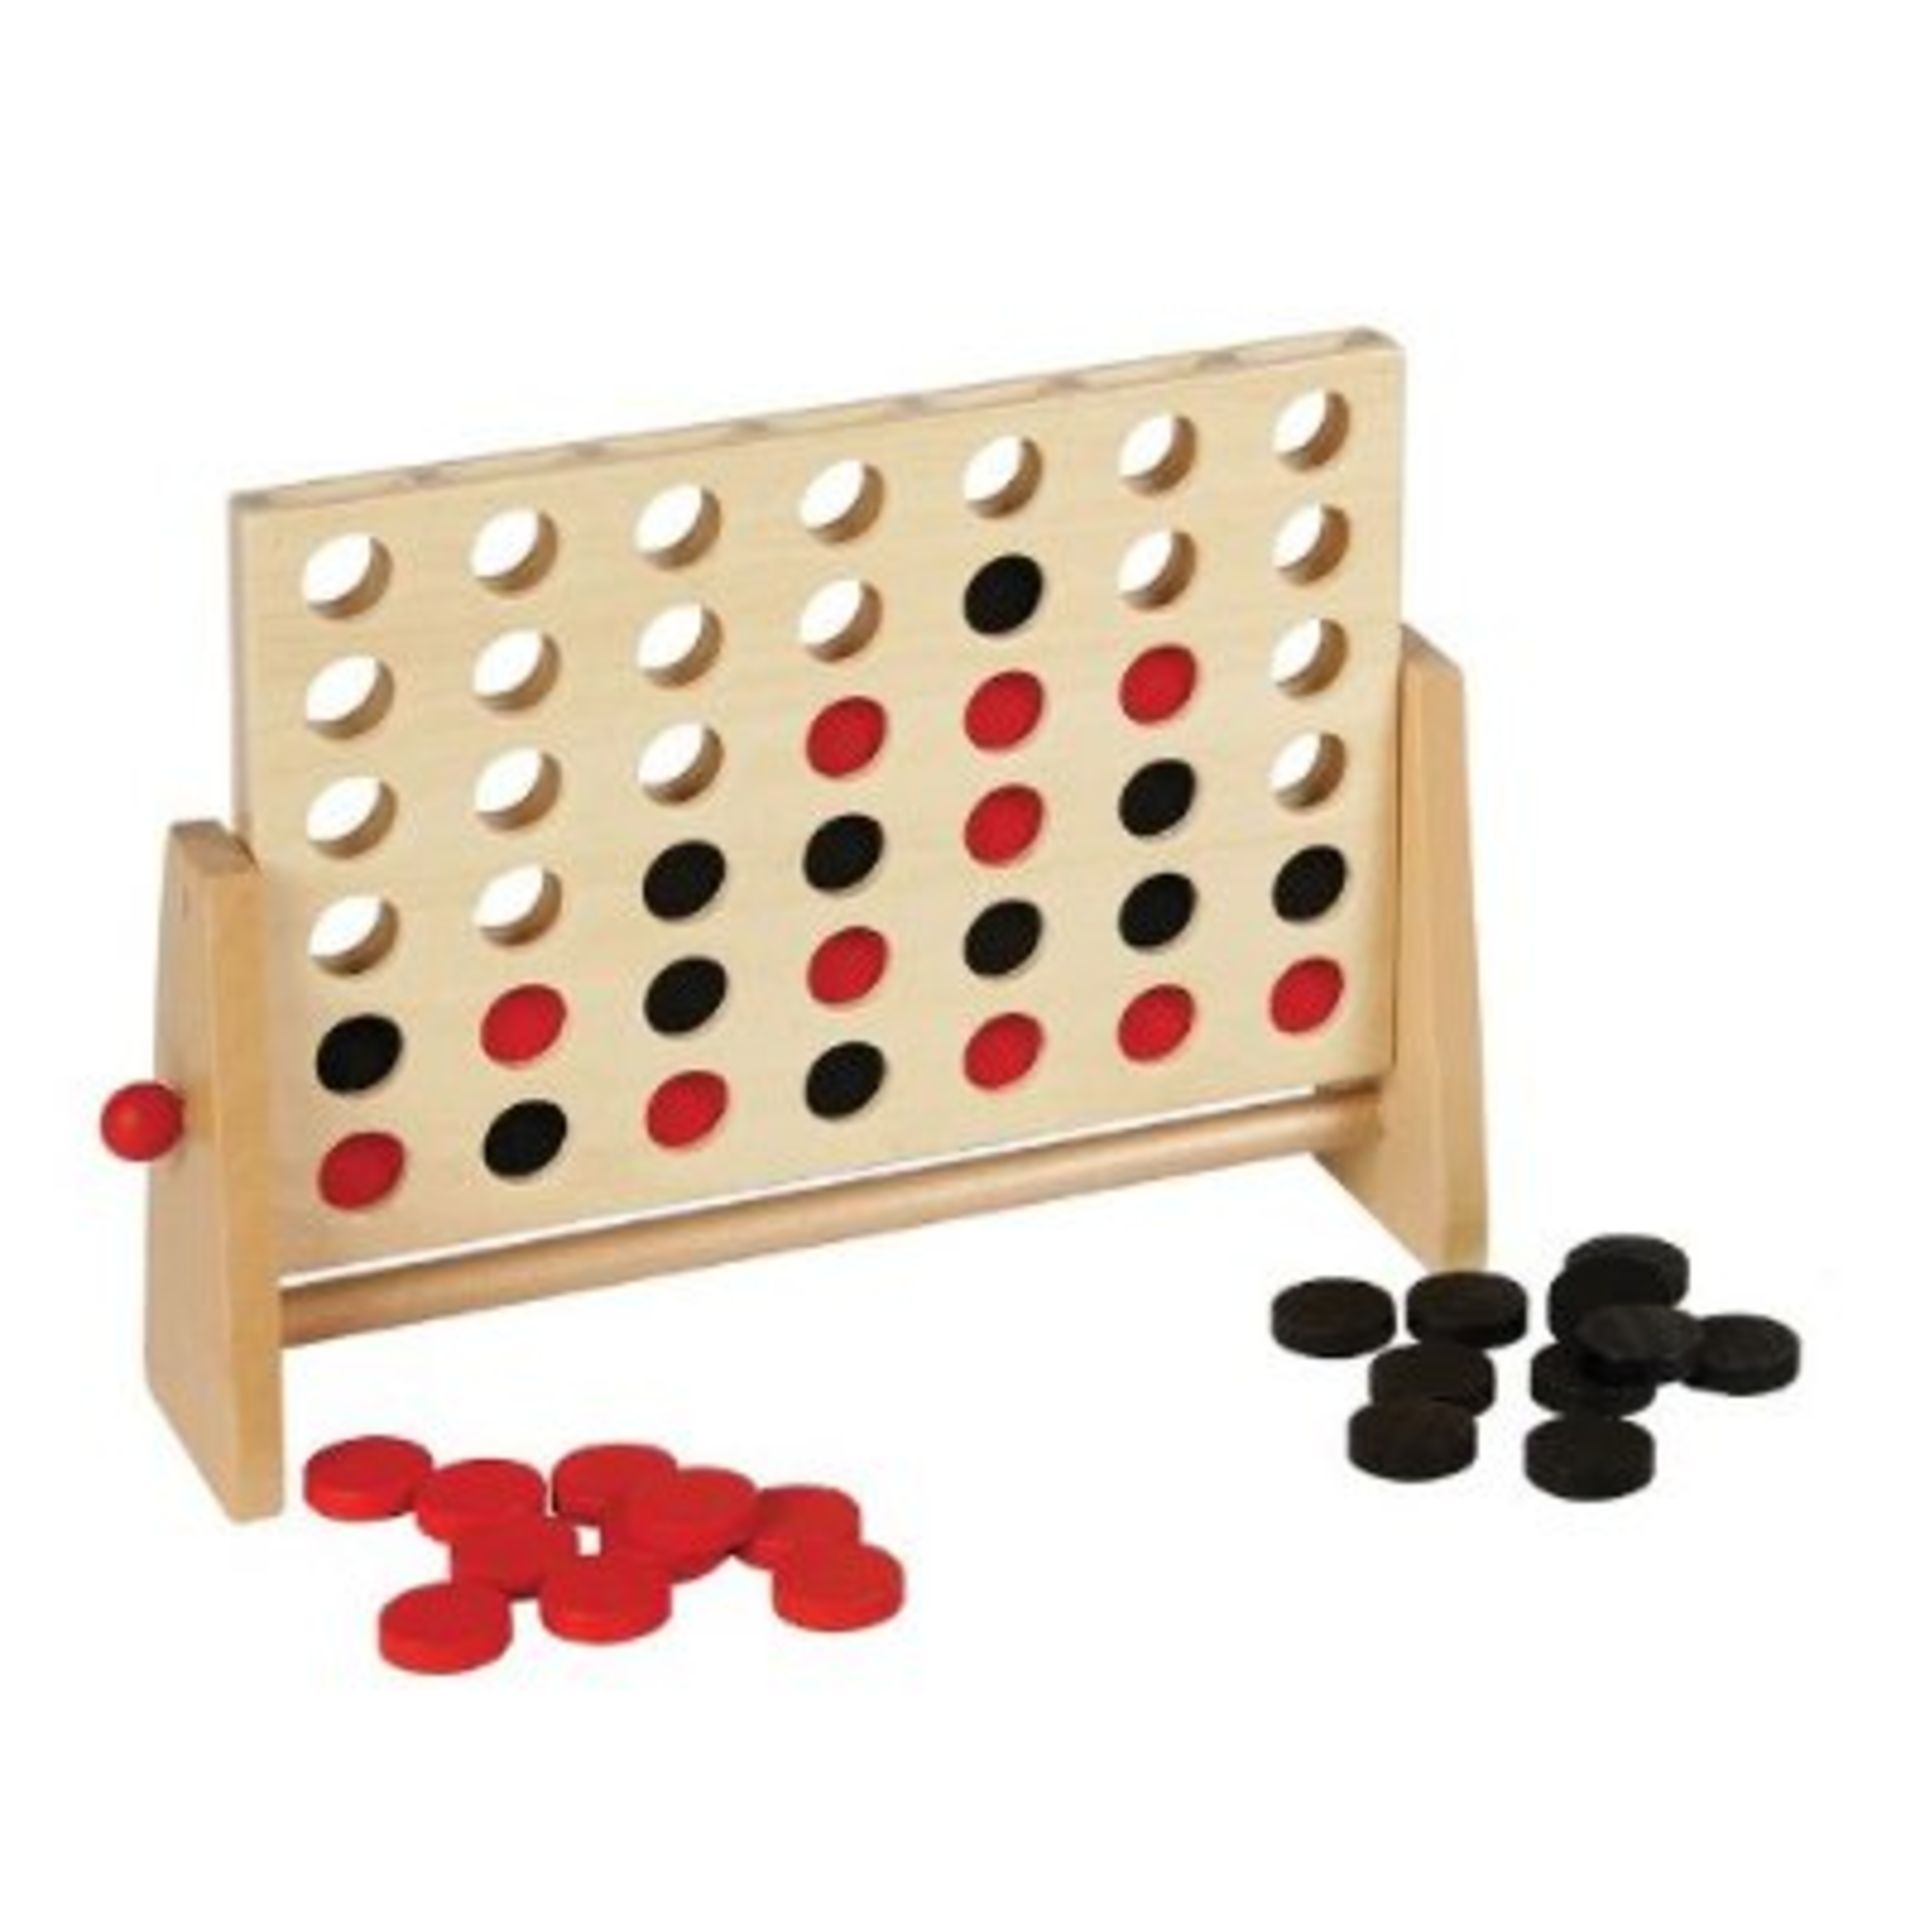 V Wooden Connect Four in a row game on swivel stand X  8  Bid price to be multiplied by Eight